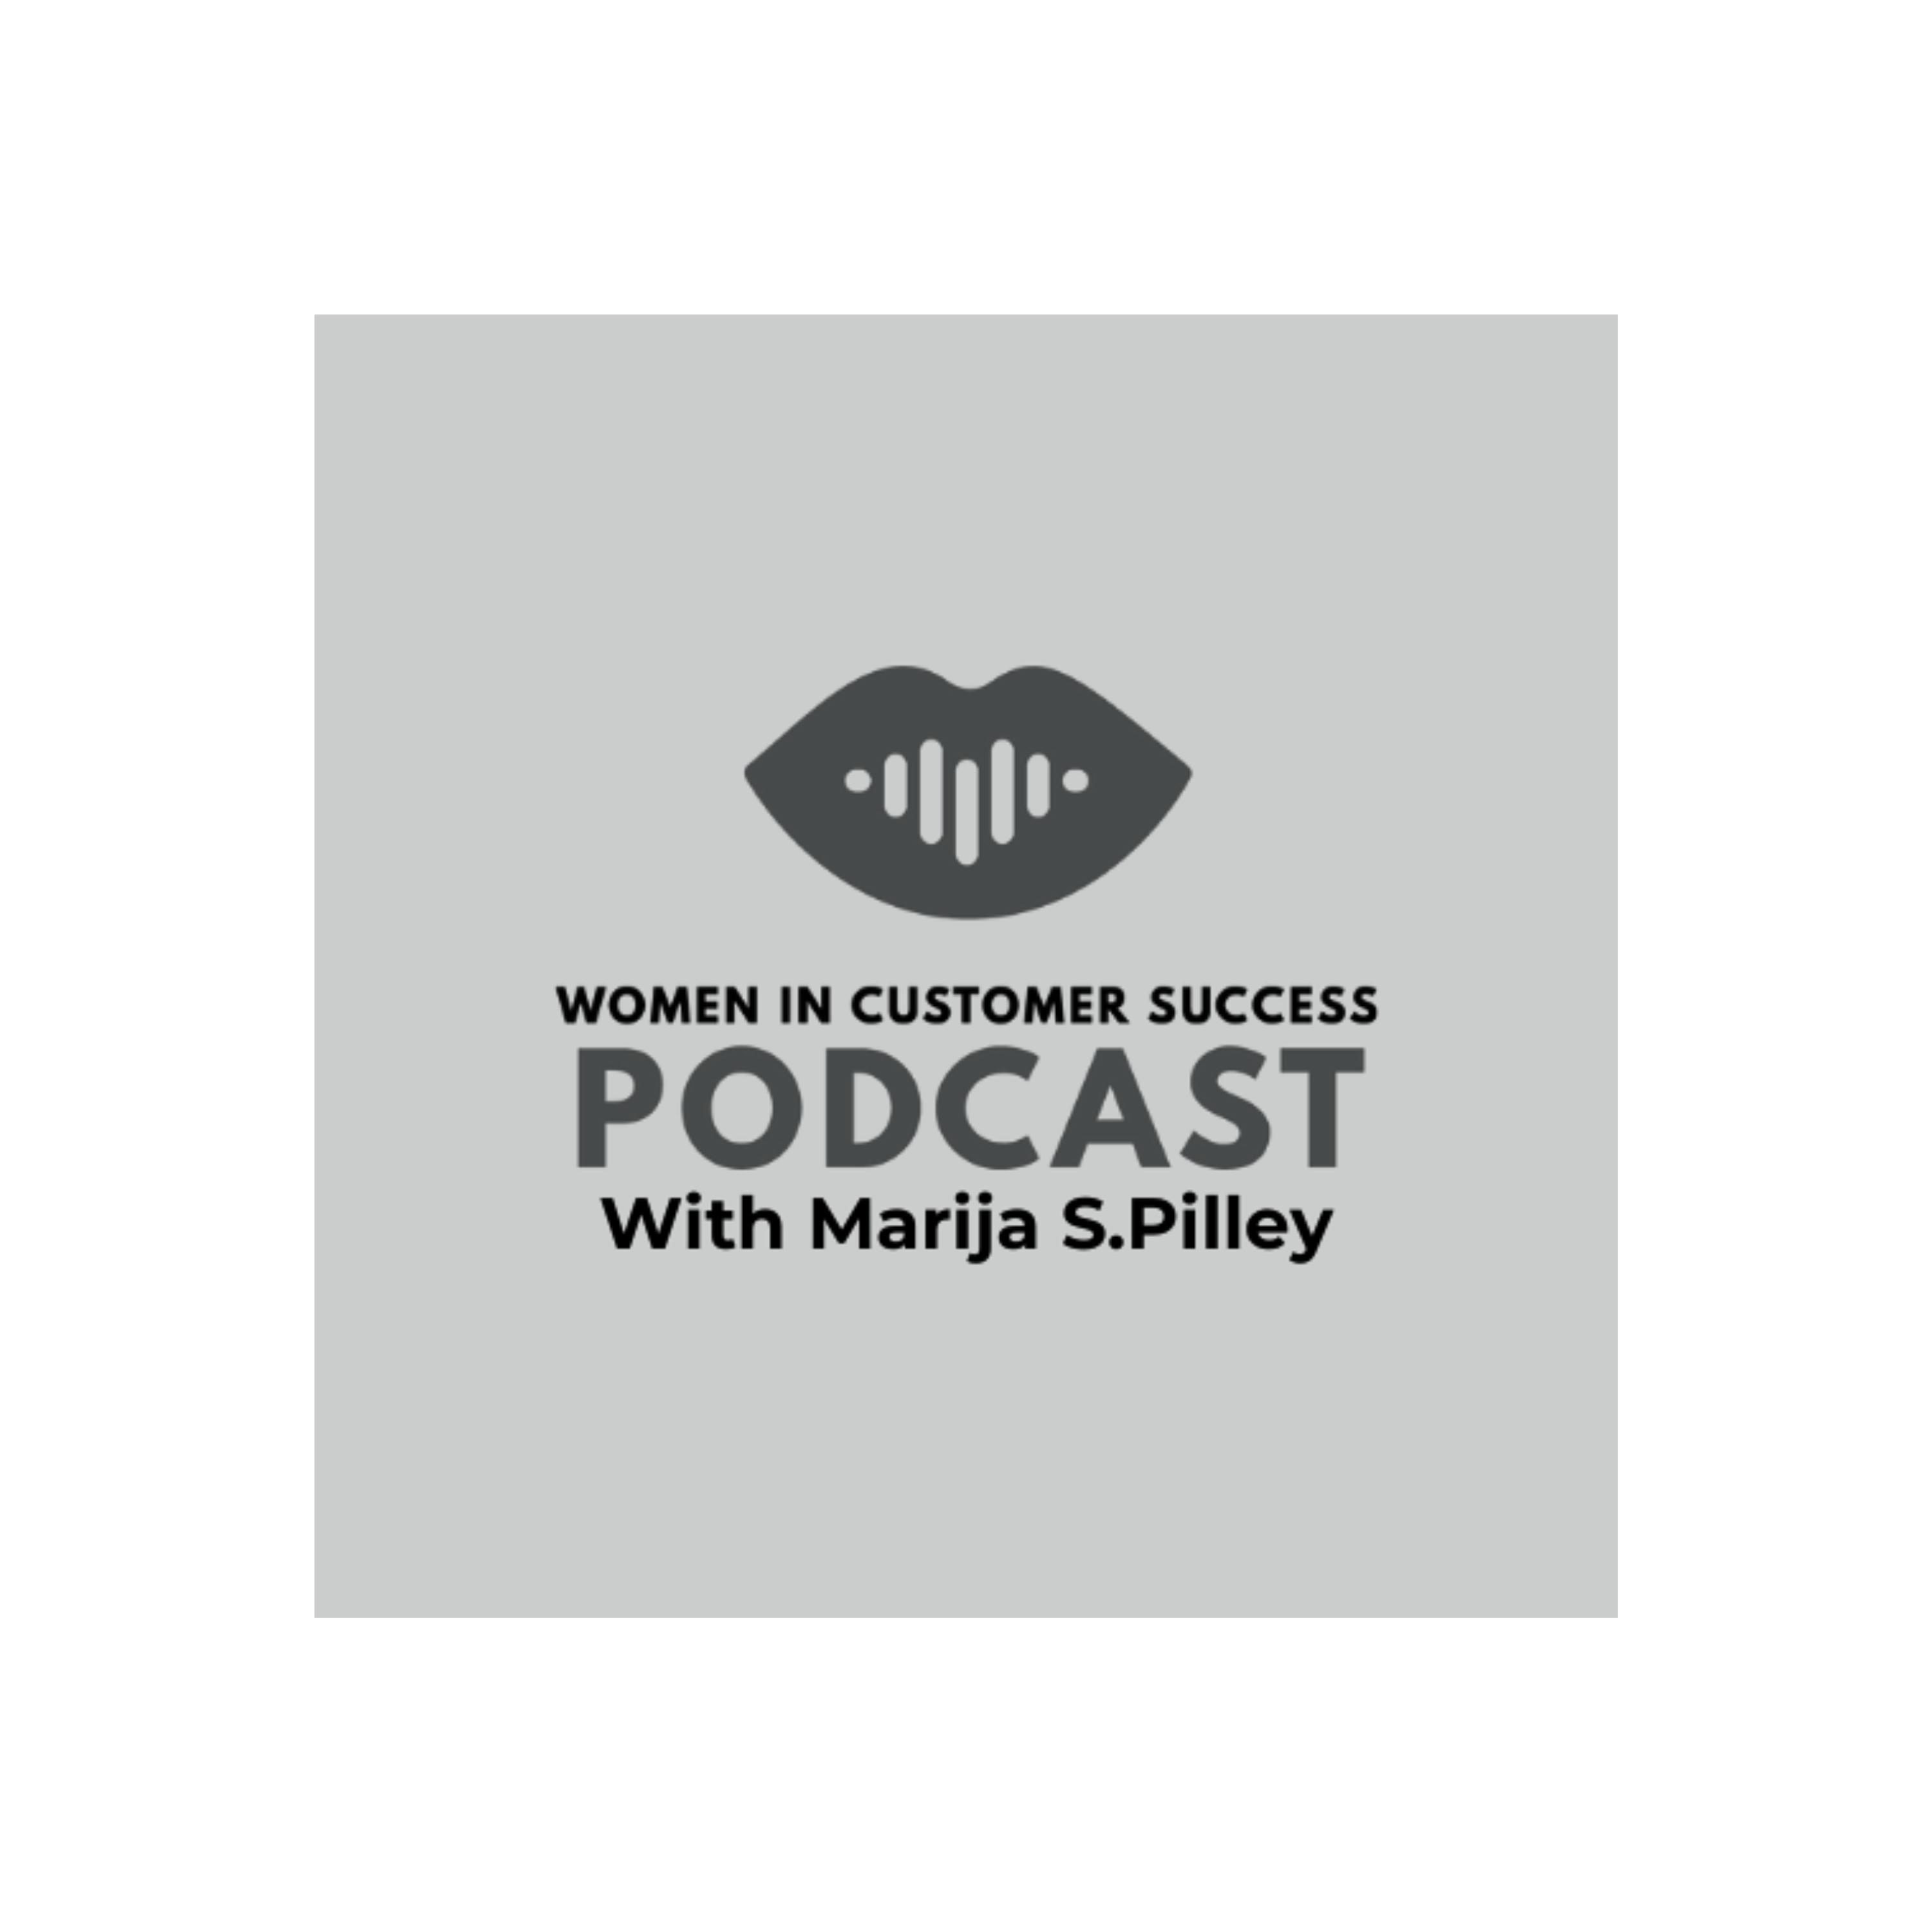 Copy of this is growth podcast CUSTOMER SUCCESS (4)